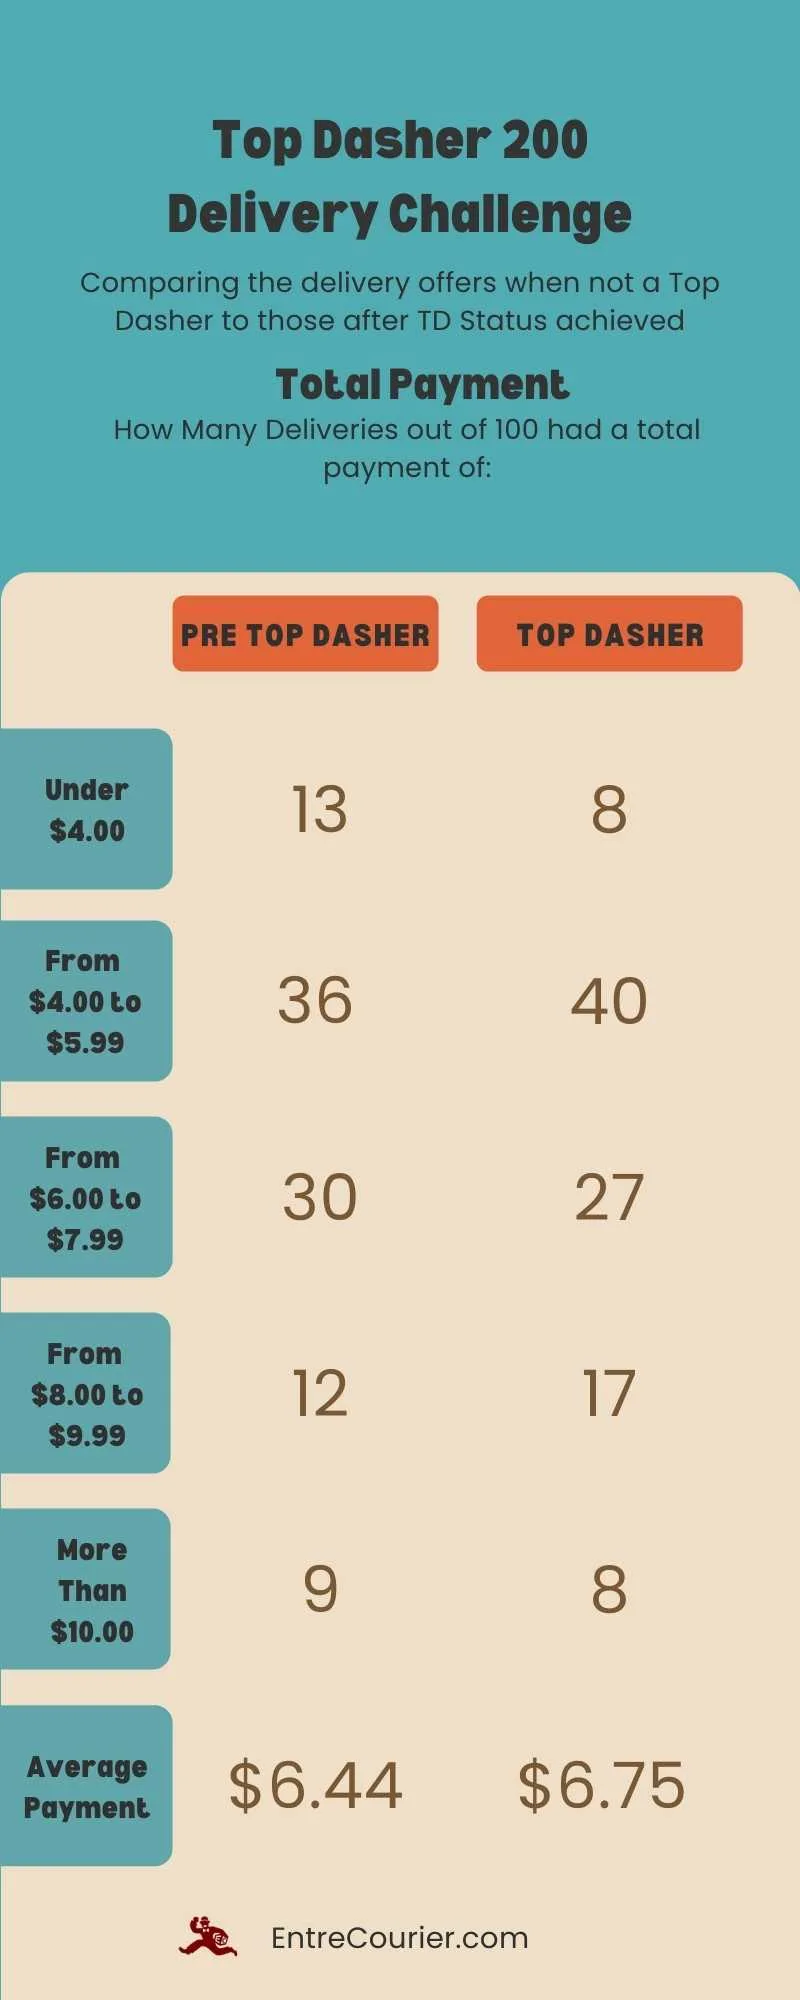 Infographic comparing the number of higher and lower paying deliveries as top dasher to those of non top dasher.